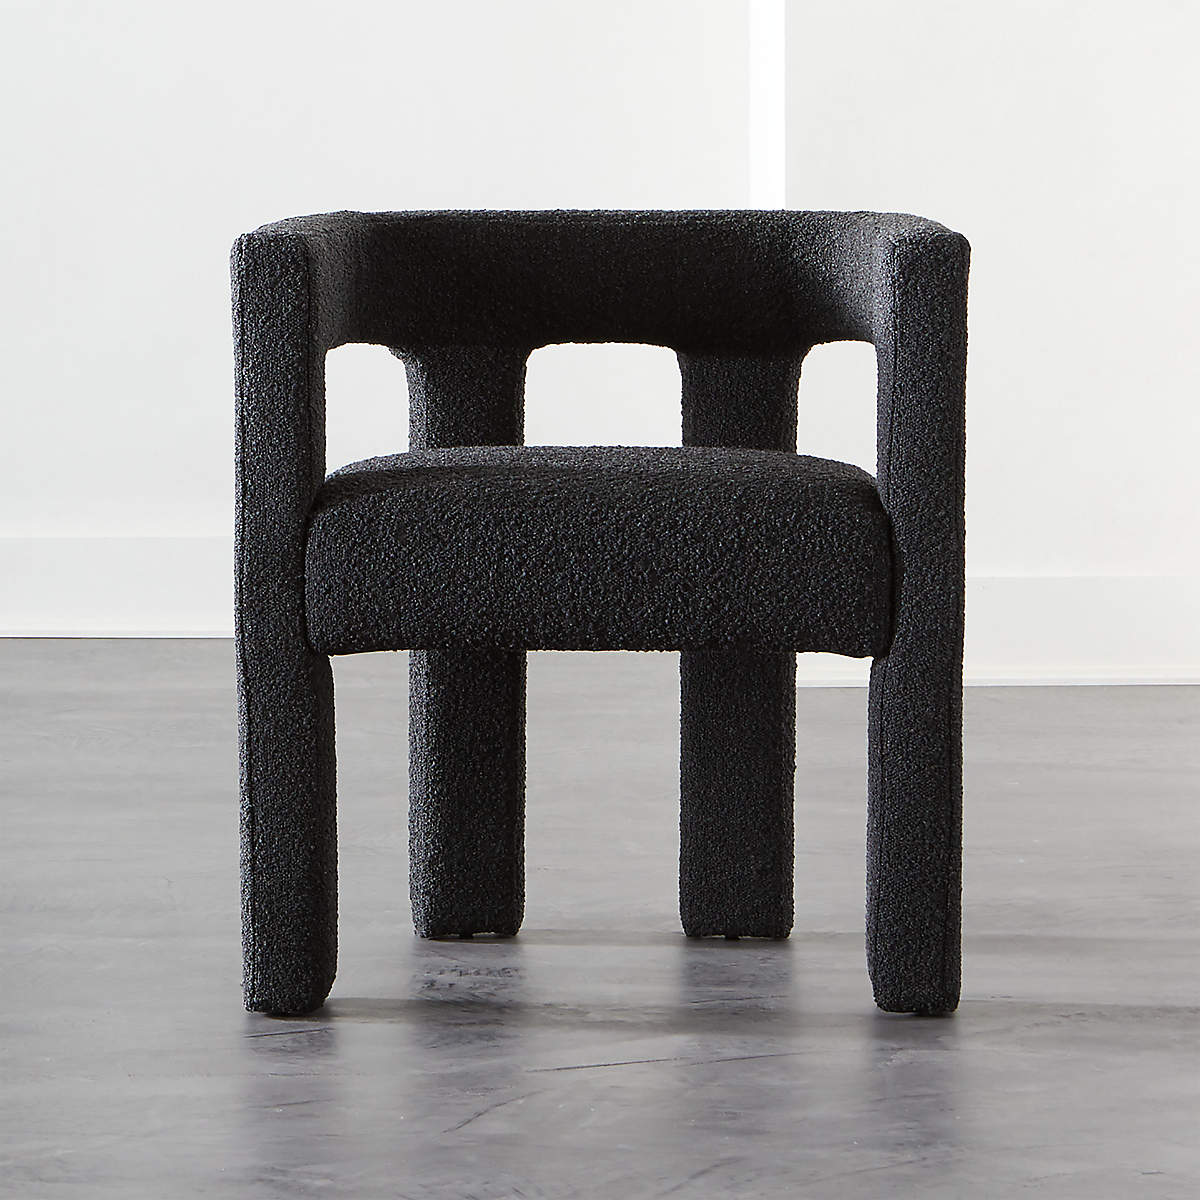 Stature Black Chair- image 1 of 10 (Open Larger View)